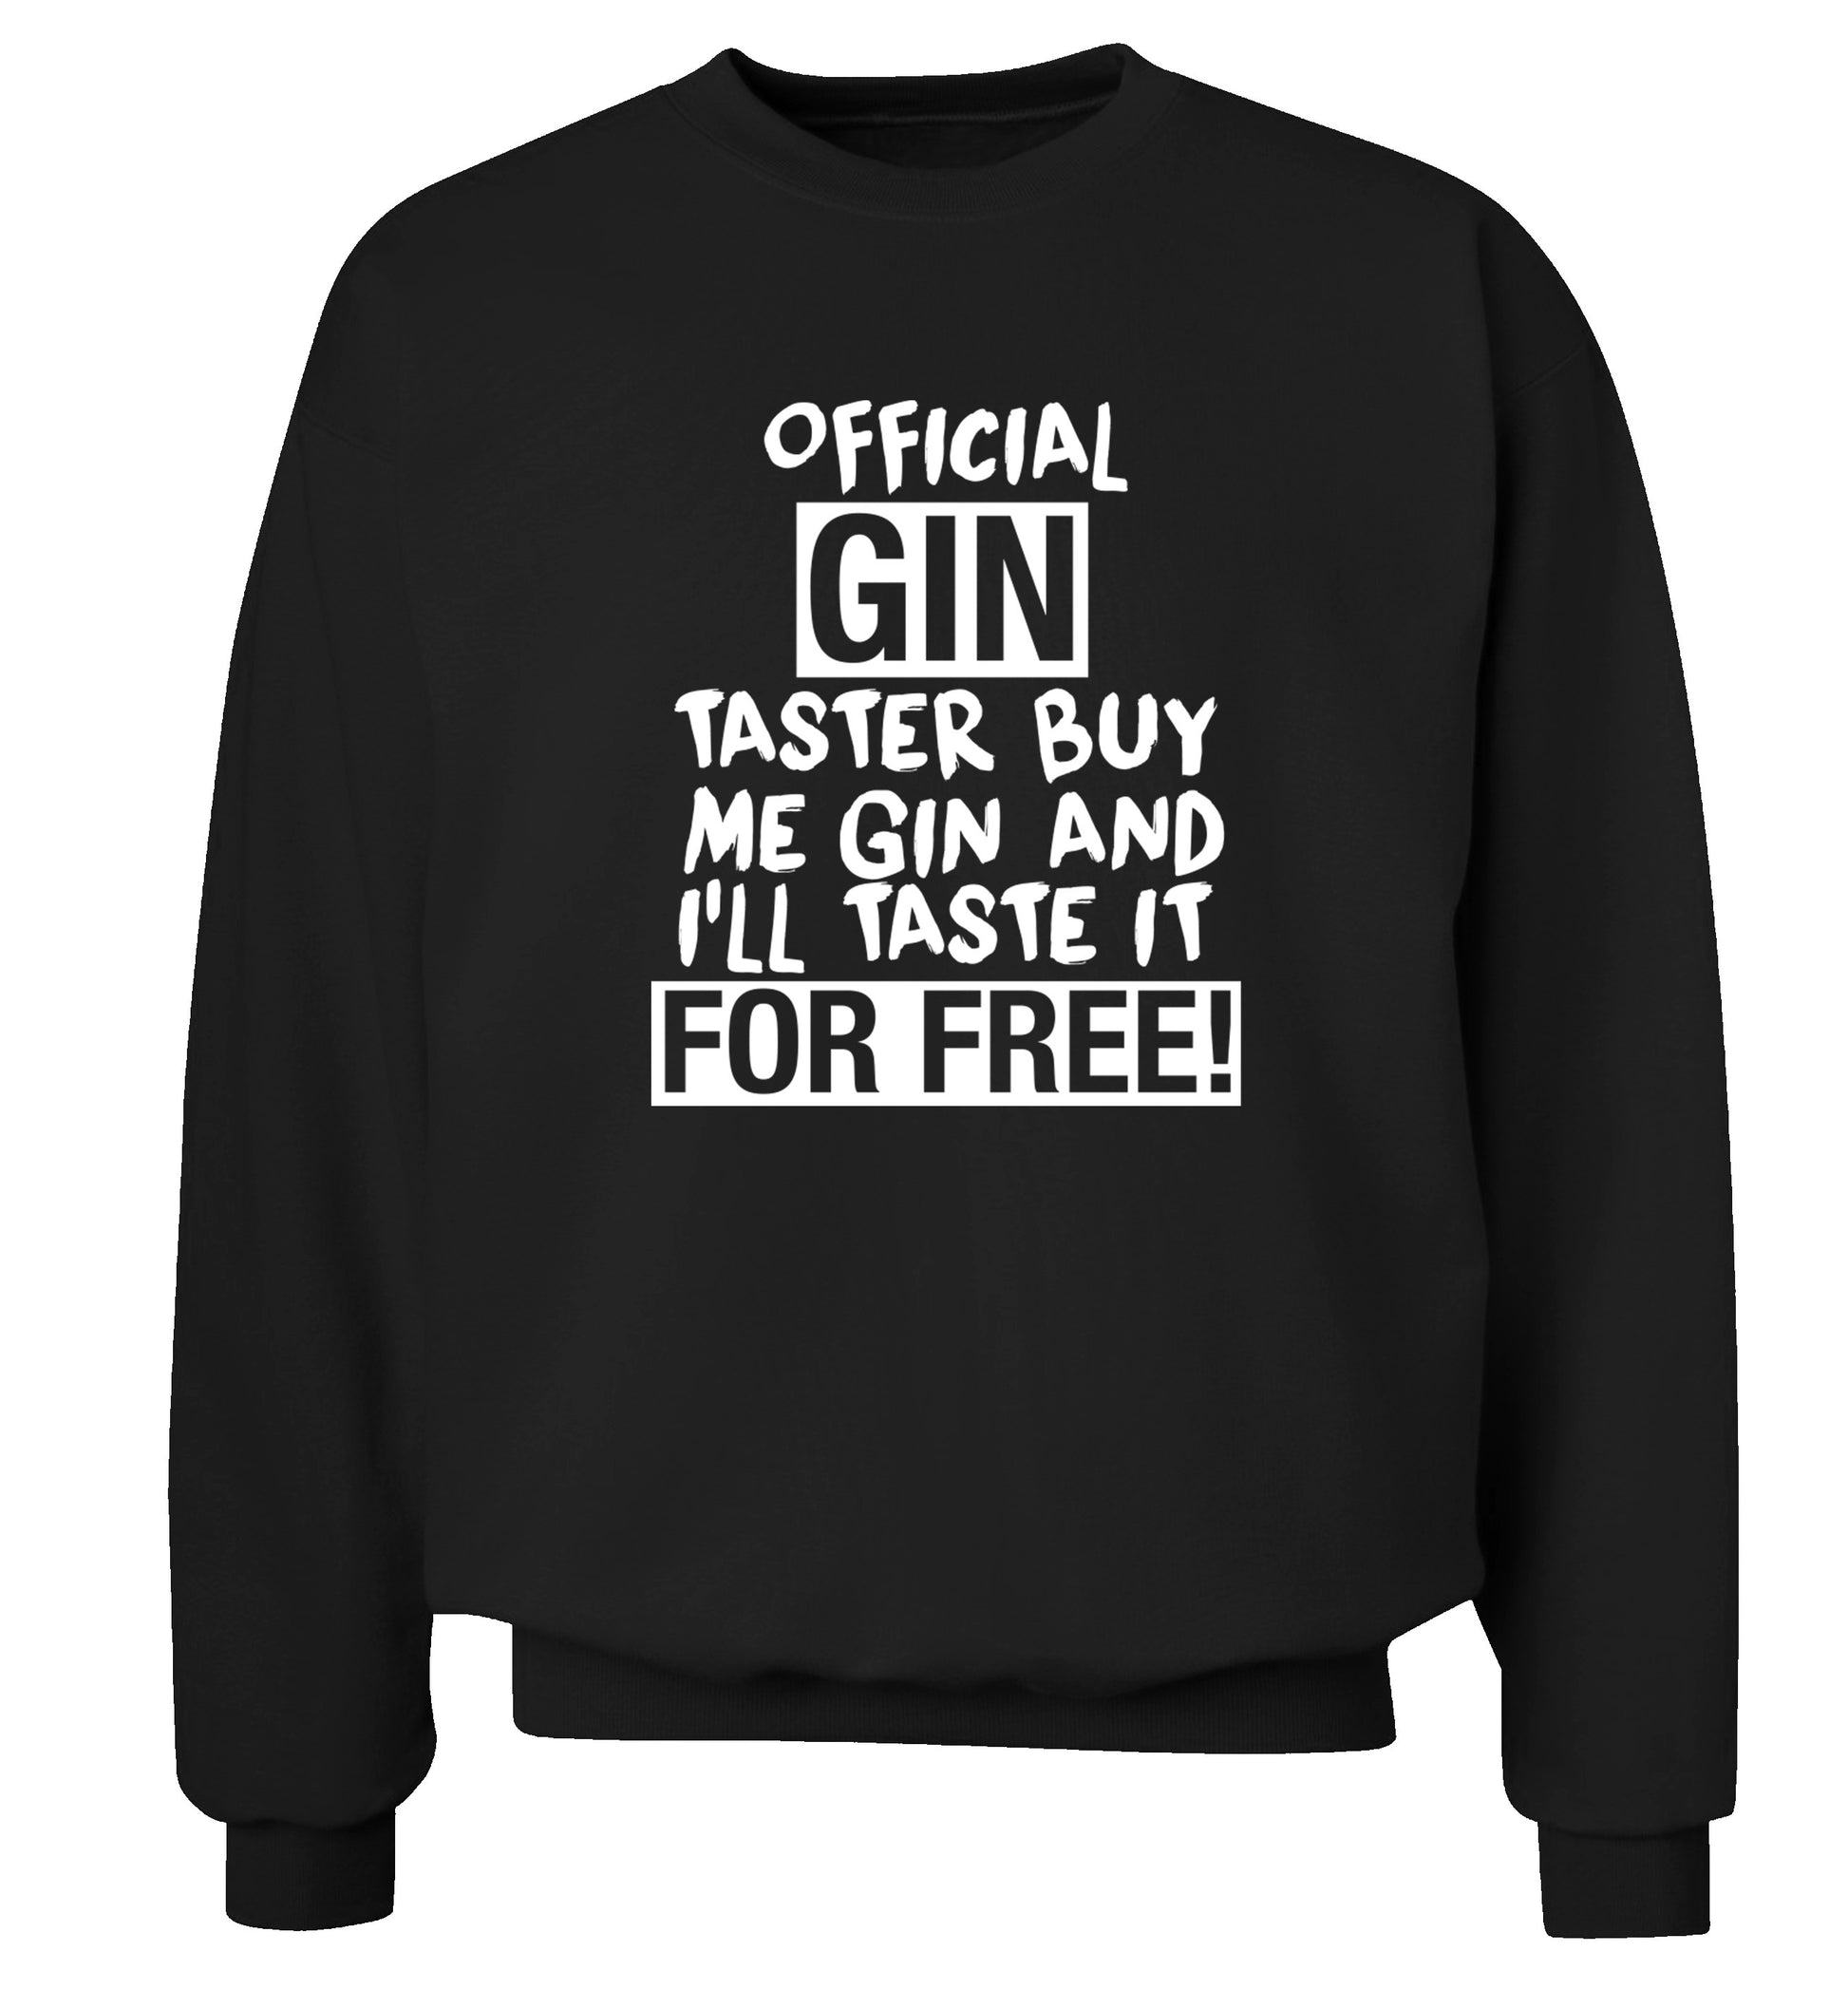 Official gin taster buy me gin and I'll taste it for free Adult's unisex black Sweater 2XL